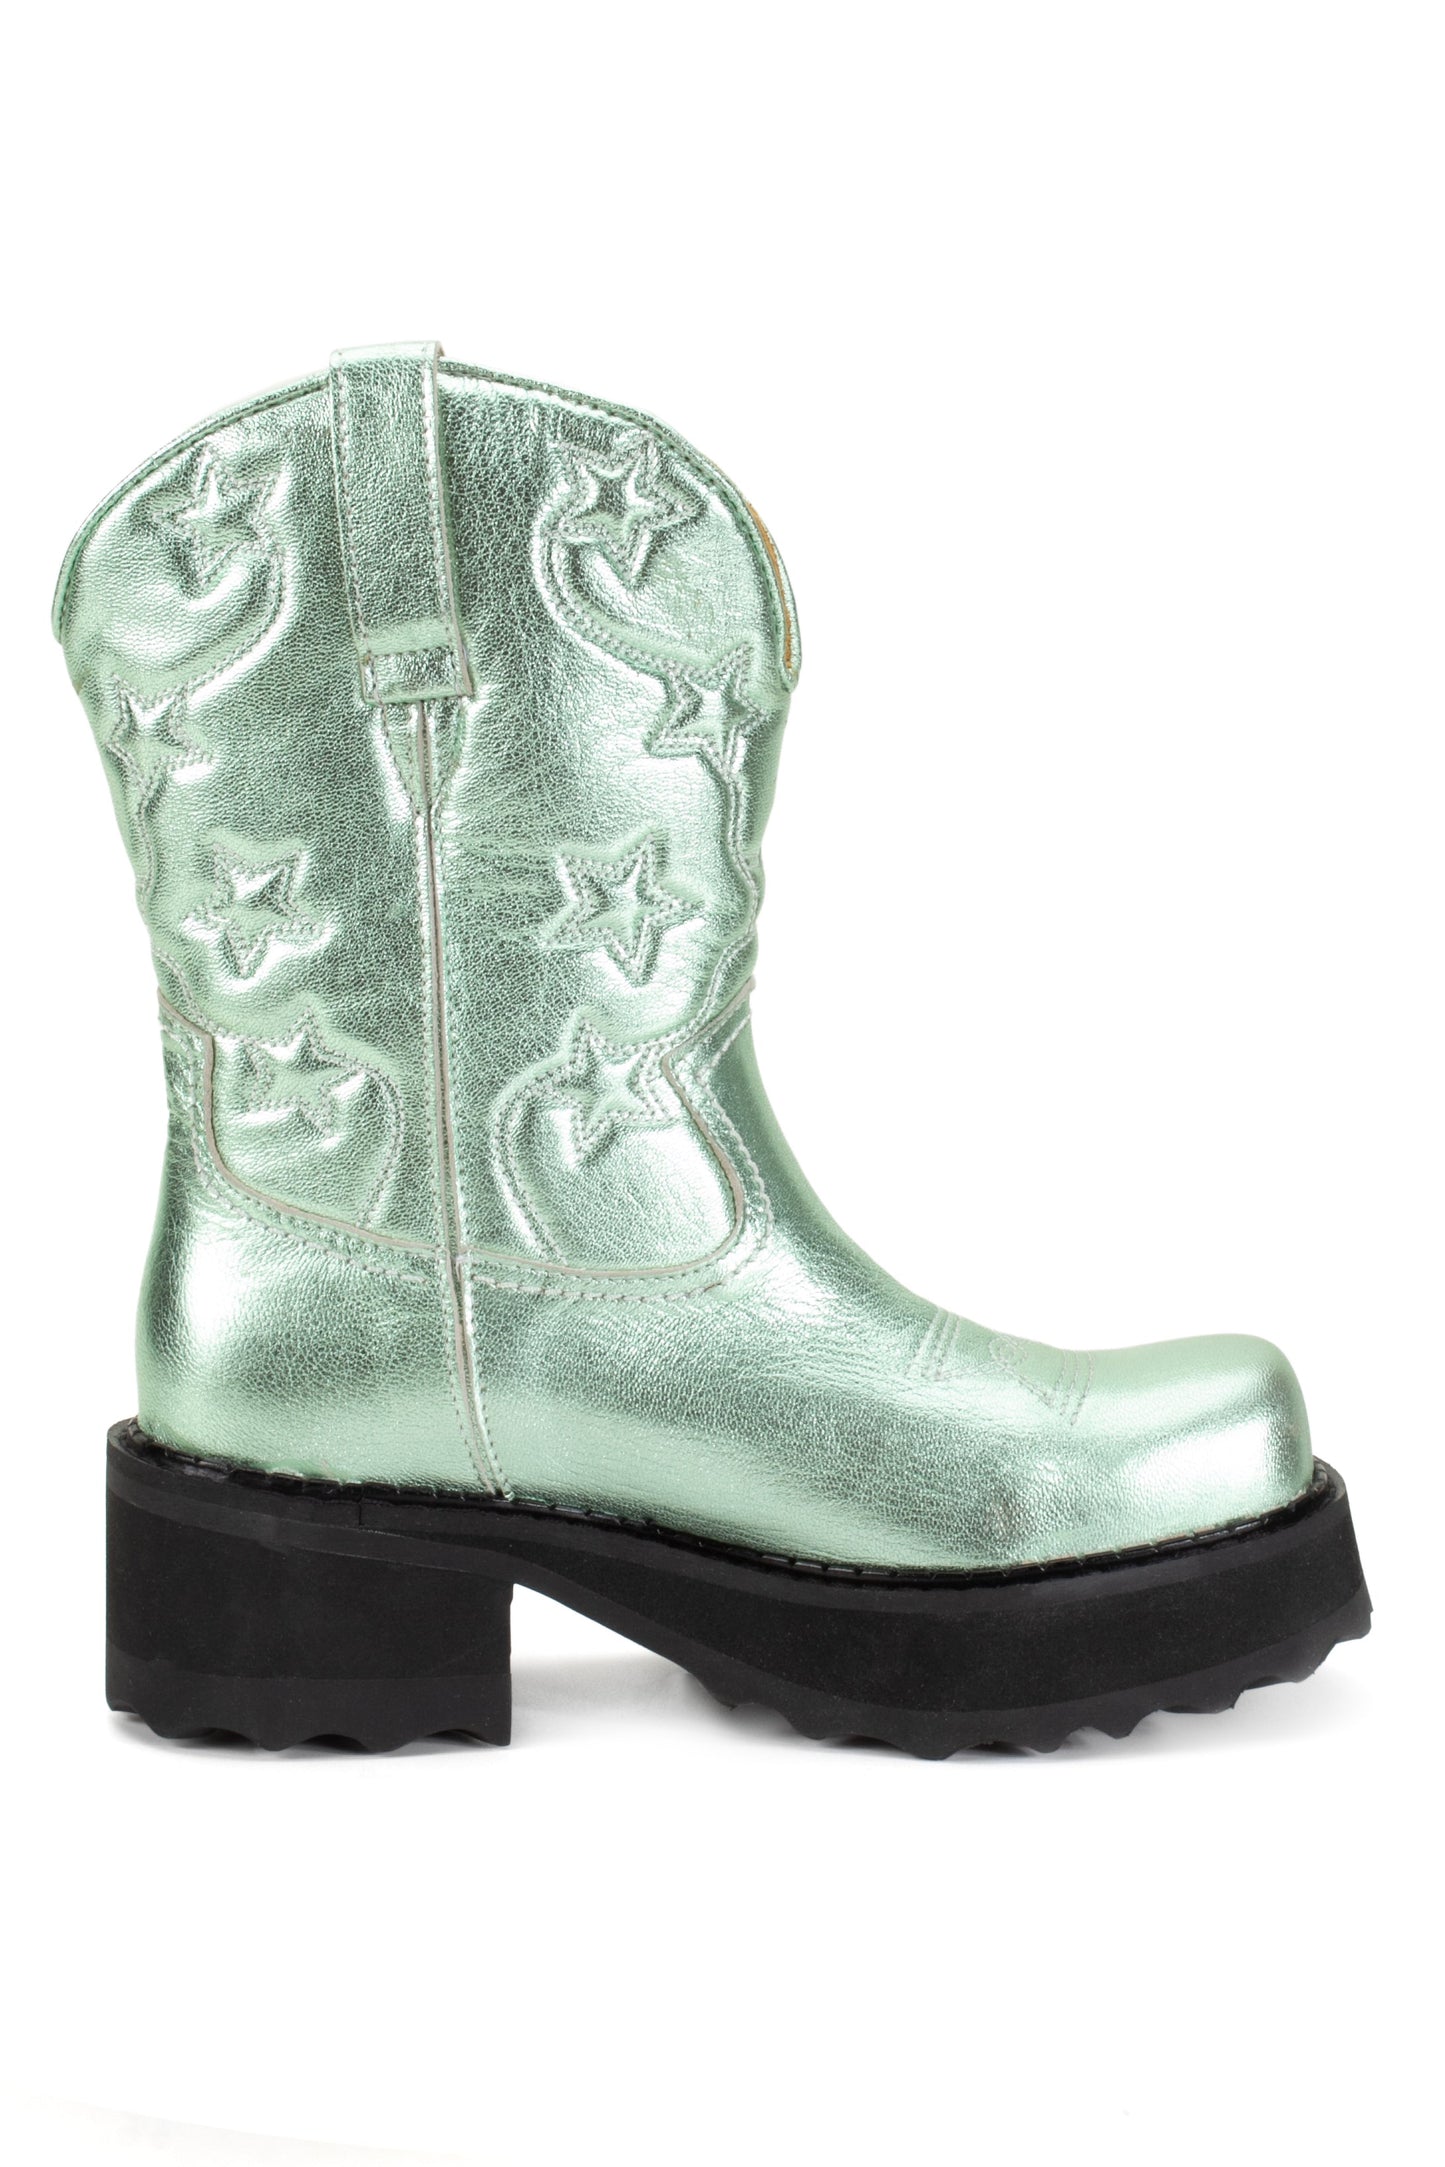 Mid-size boots, Western style look, engraved lone stars front and back